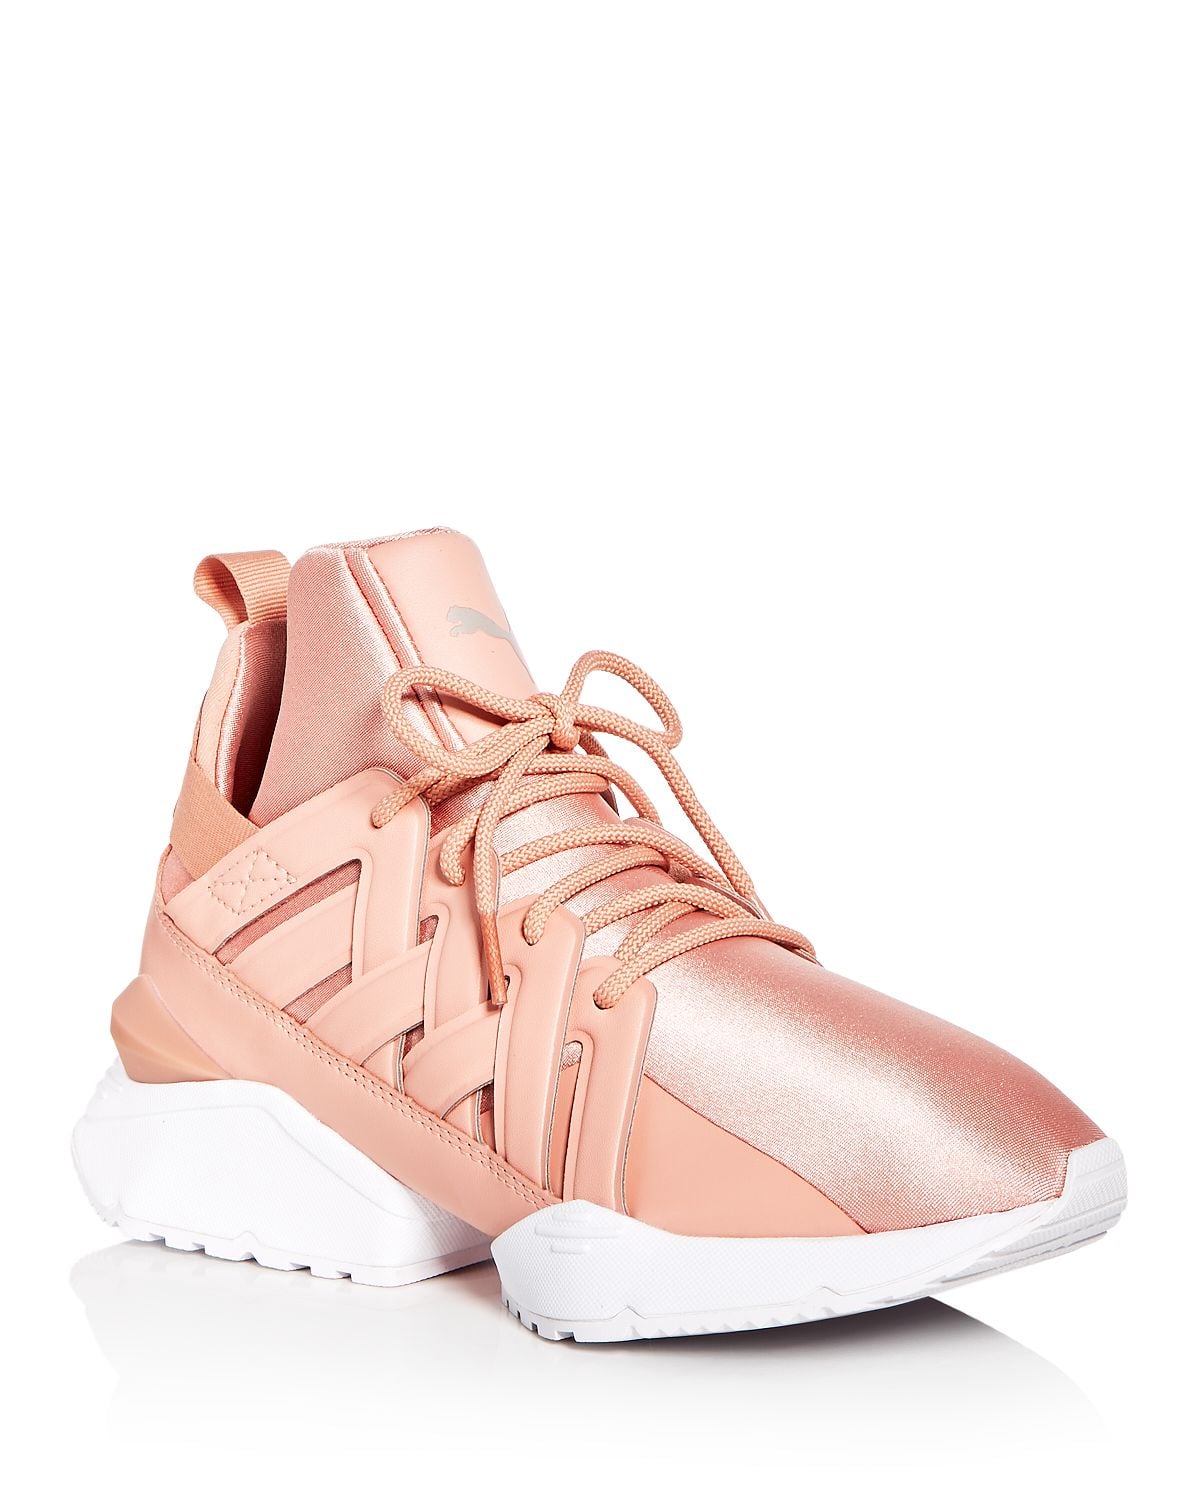 tall Encourage magnet Puma Women's Muse Echo Satin High Top Sneakers | After the Victoria's  Secret Runway, Bella Hadid Ran Through the Streets in Rad Pink High-Tops |  POPSUGAR Fashion Photo 15